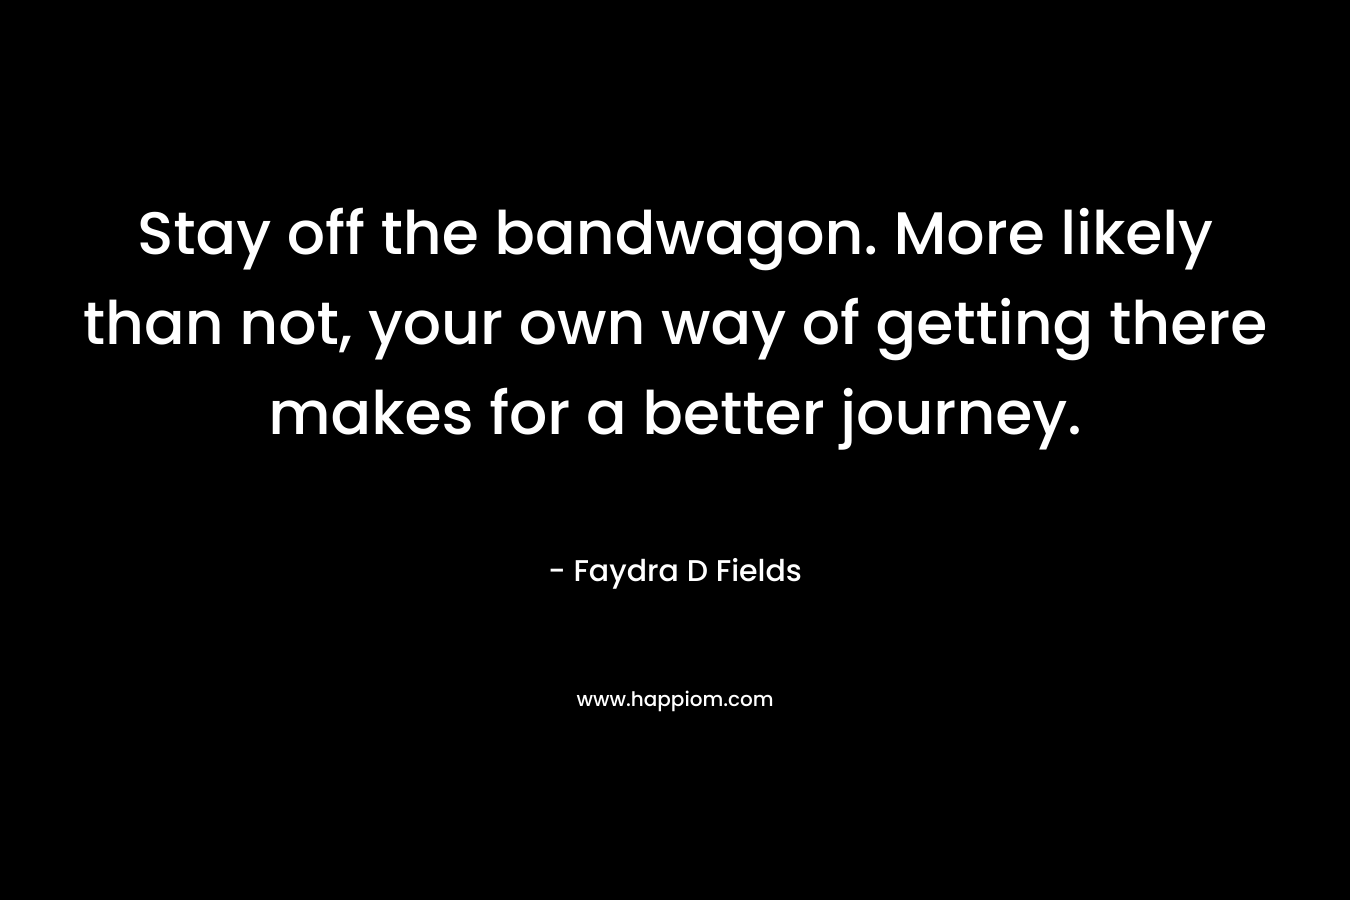 Stay off the bandwagon. More likely than not, your own way of getting there makes for a better journey. – Faydra D Fields